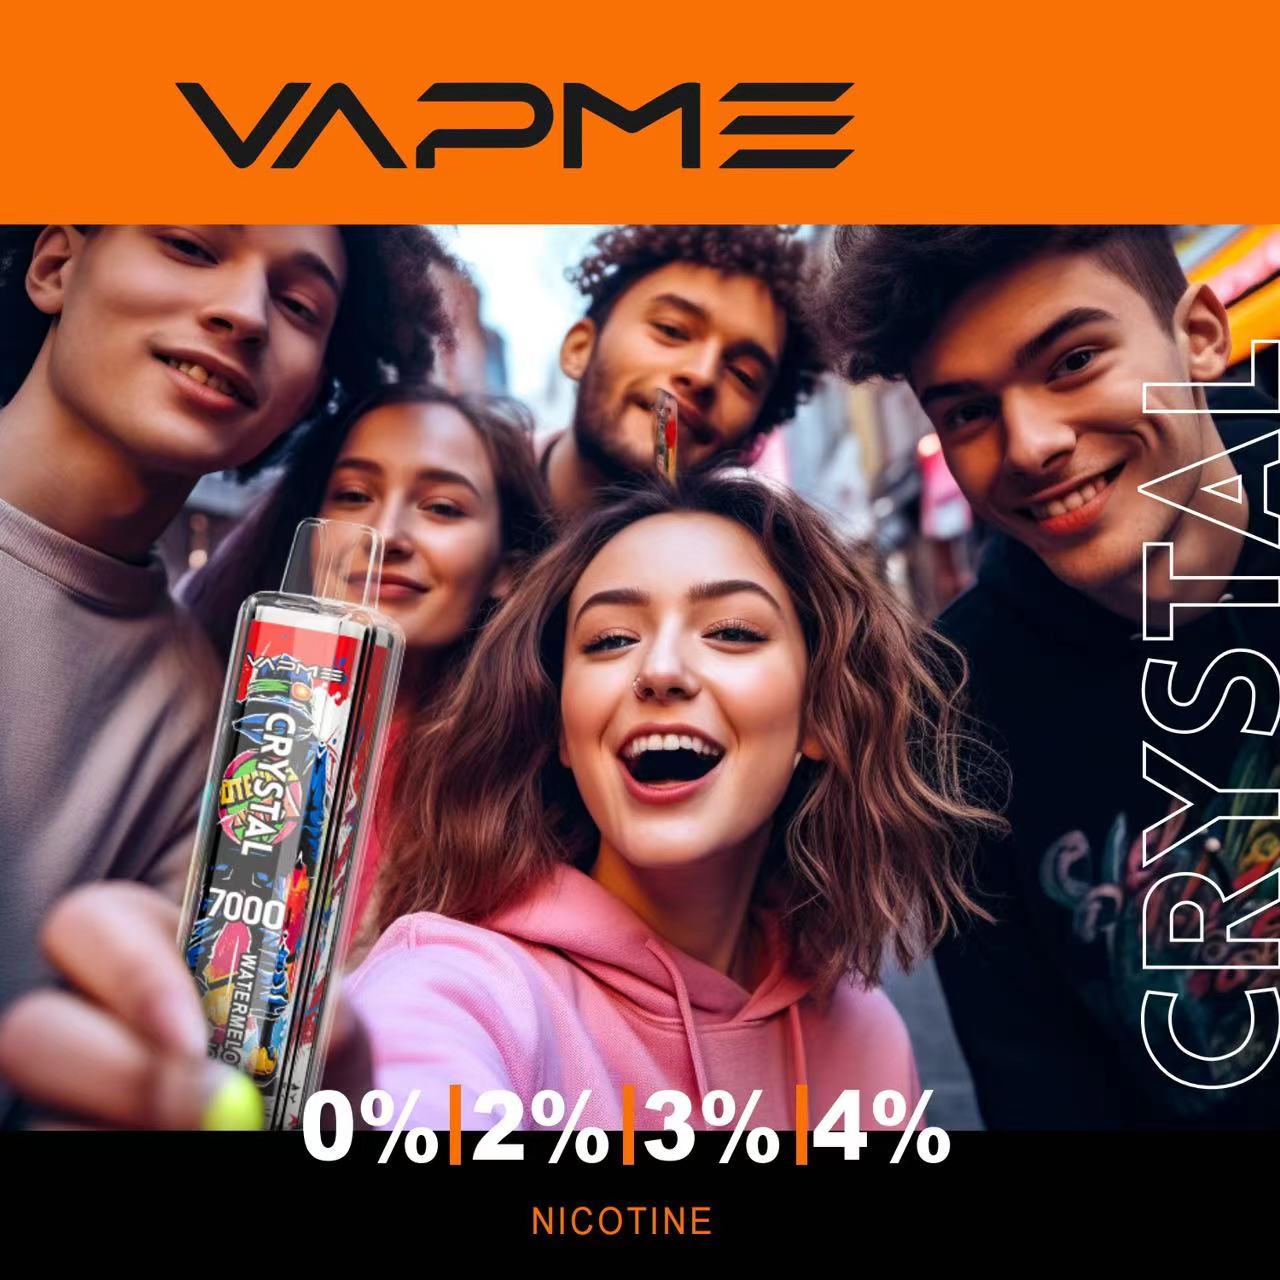 VAPME CRYSTAL 7000 puff Disposable Vape 7k puff Electronic Cigarettes 650mAh Battery 2% 14ml With 0%2%3%5% 